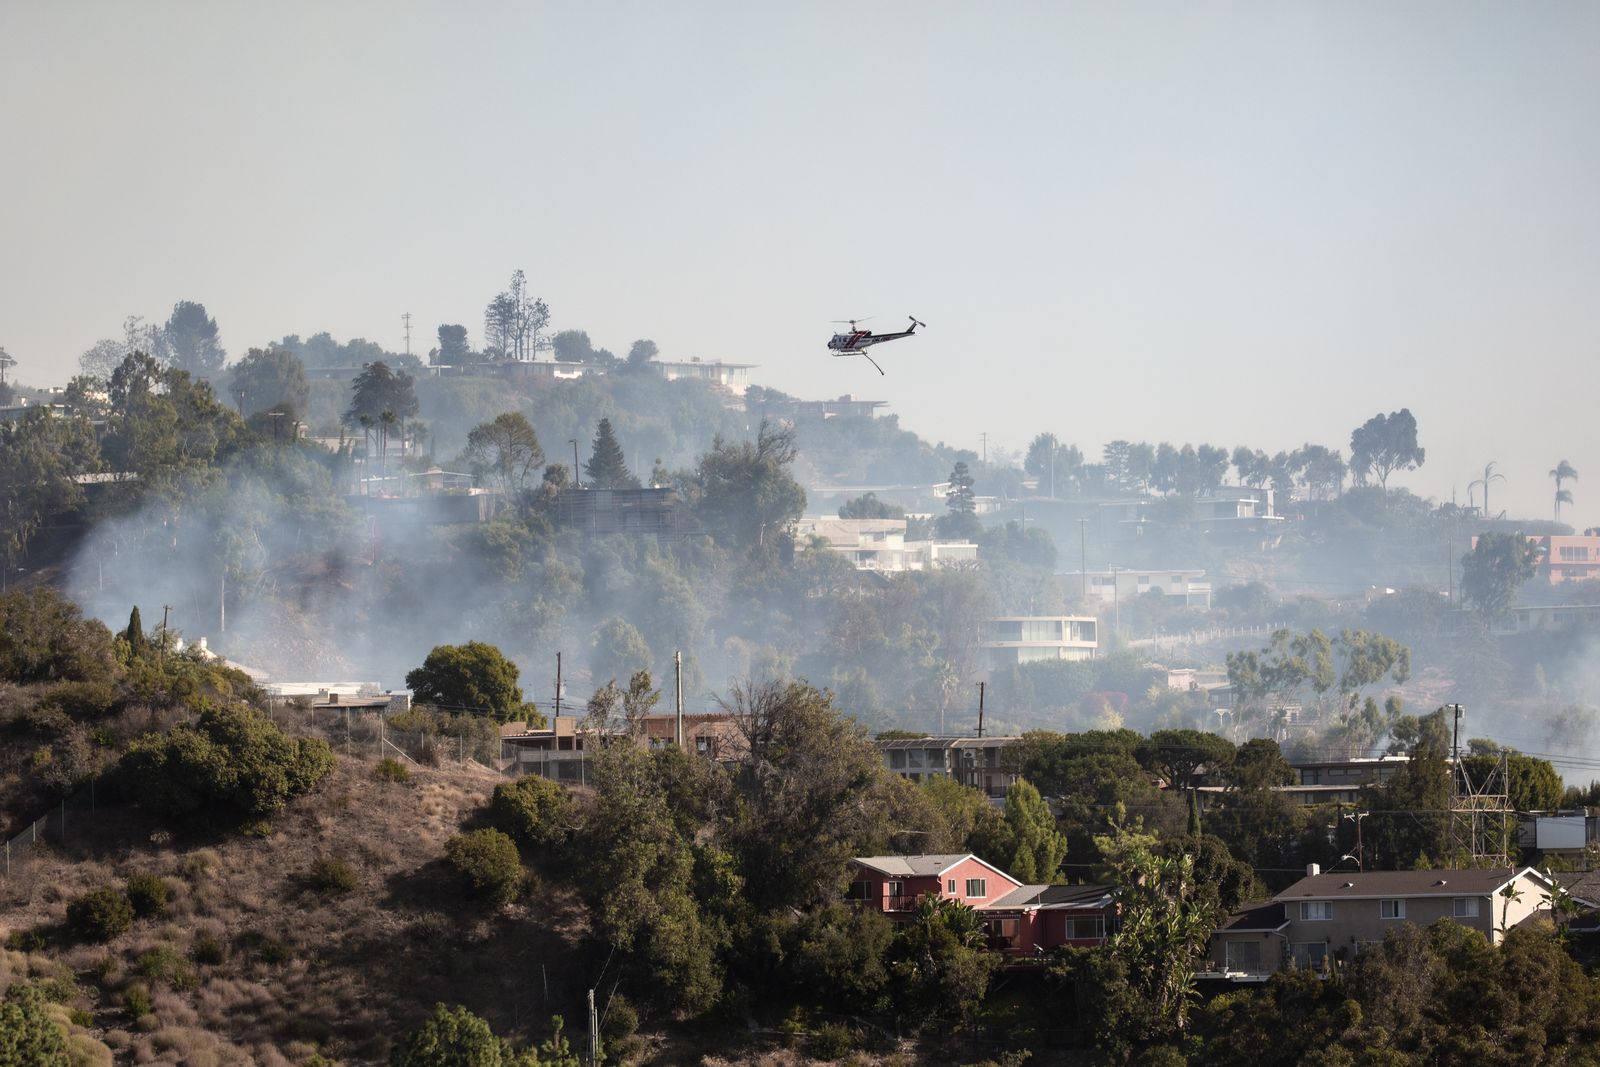 © Anastasia Samoylova - Firefighter helicopter putting out the Getty Fire. Los Angeles, CA